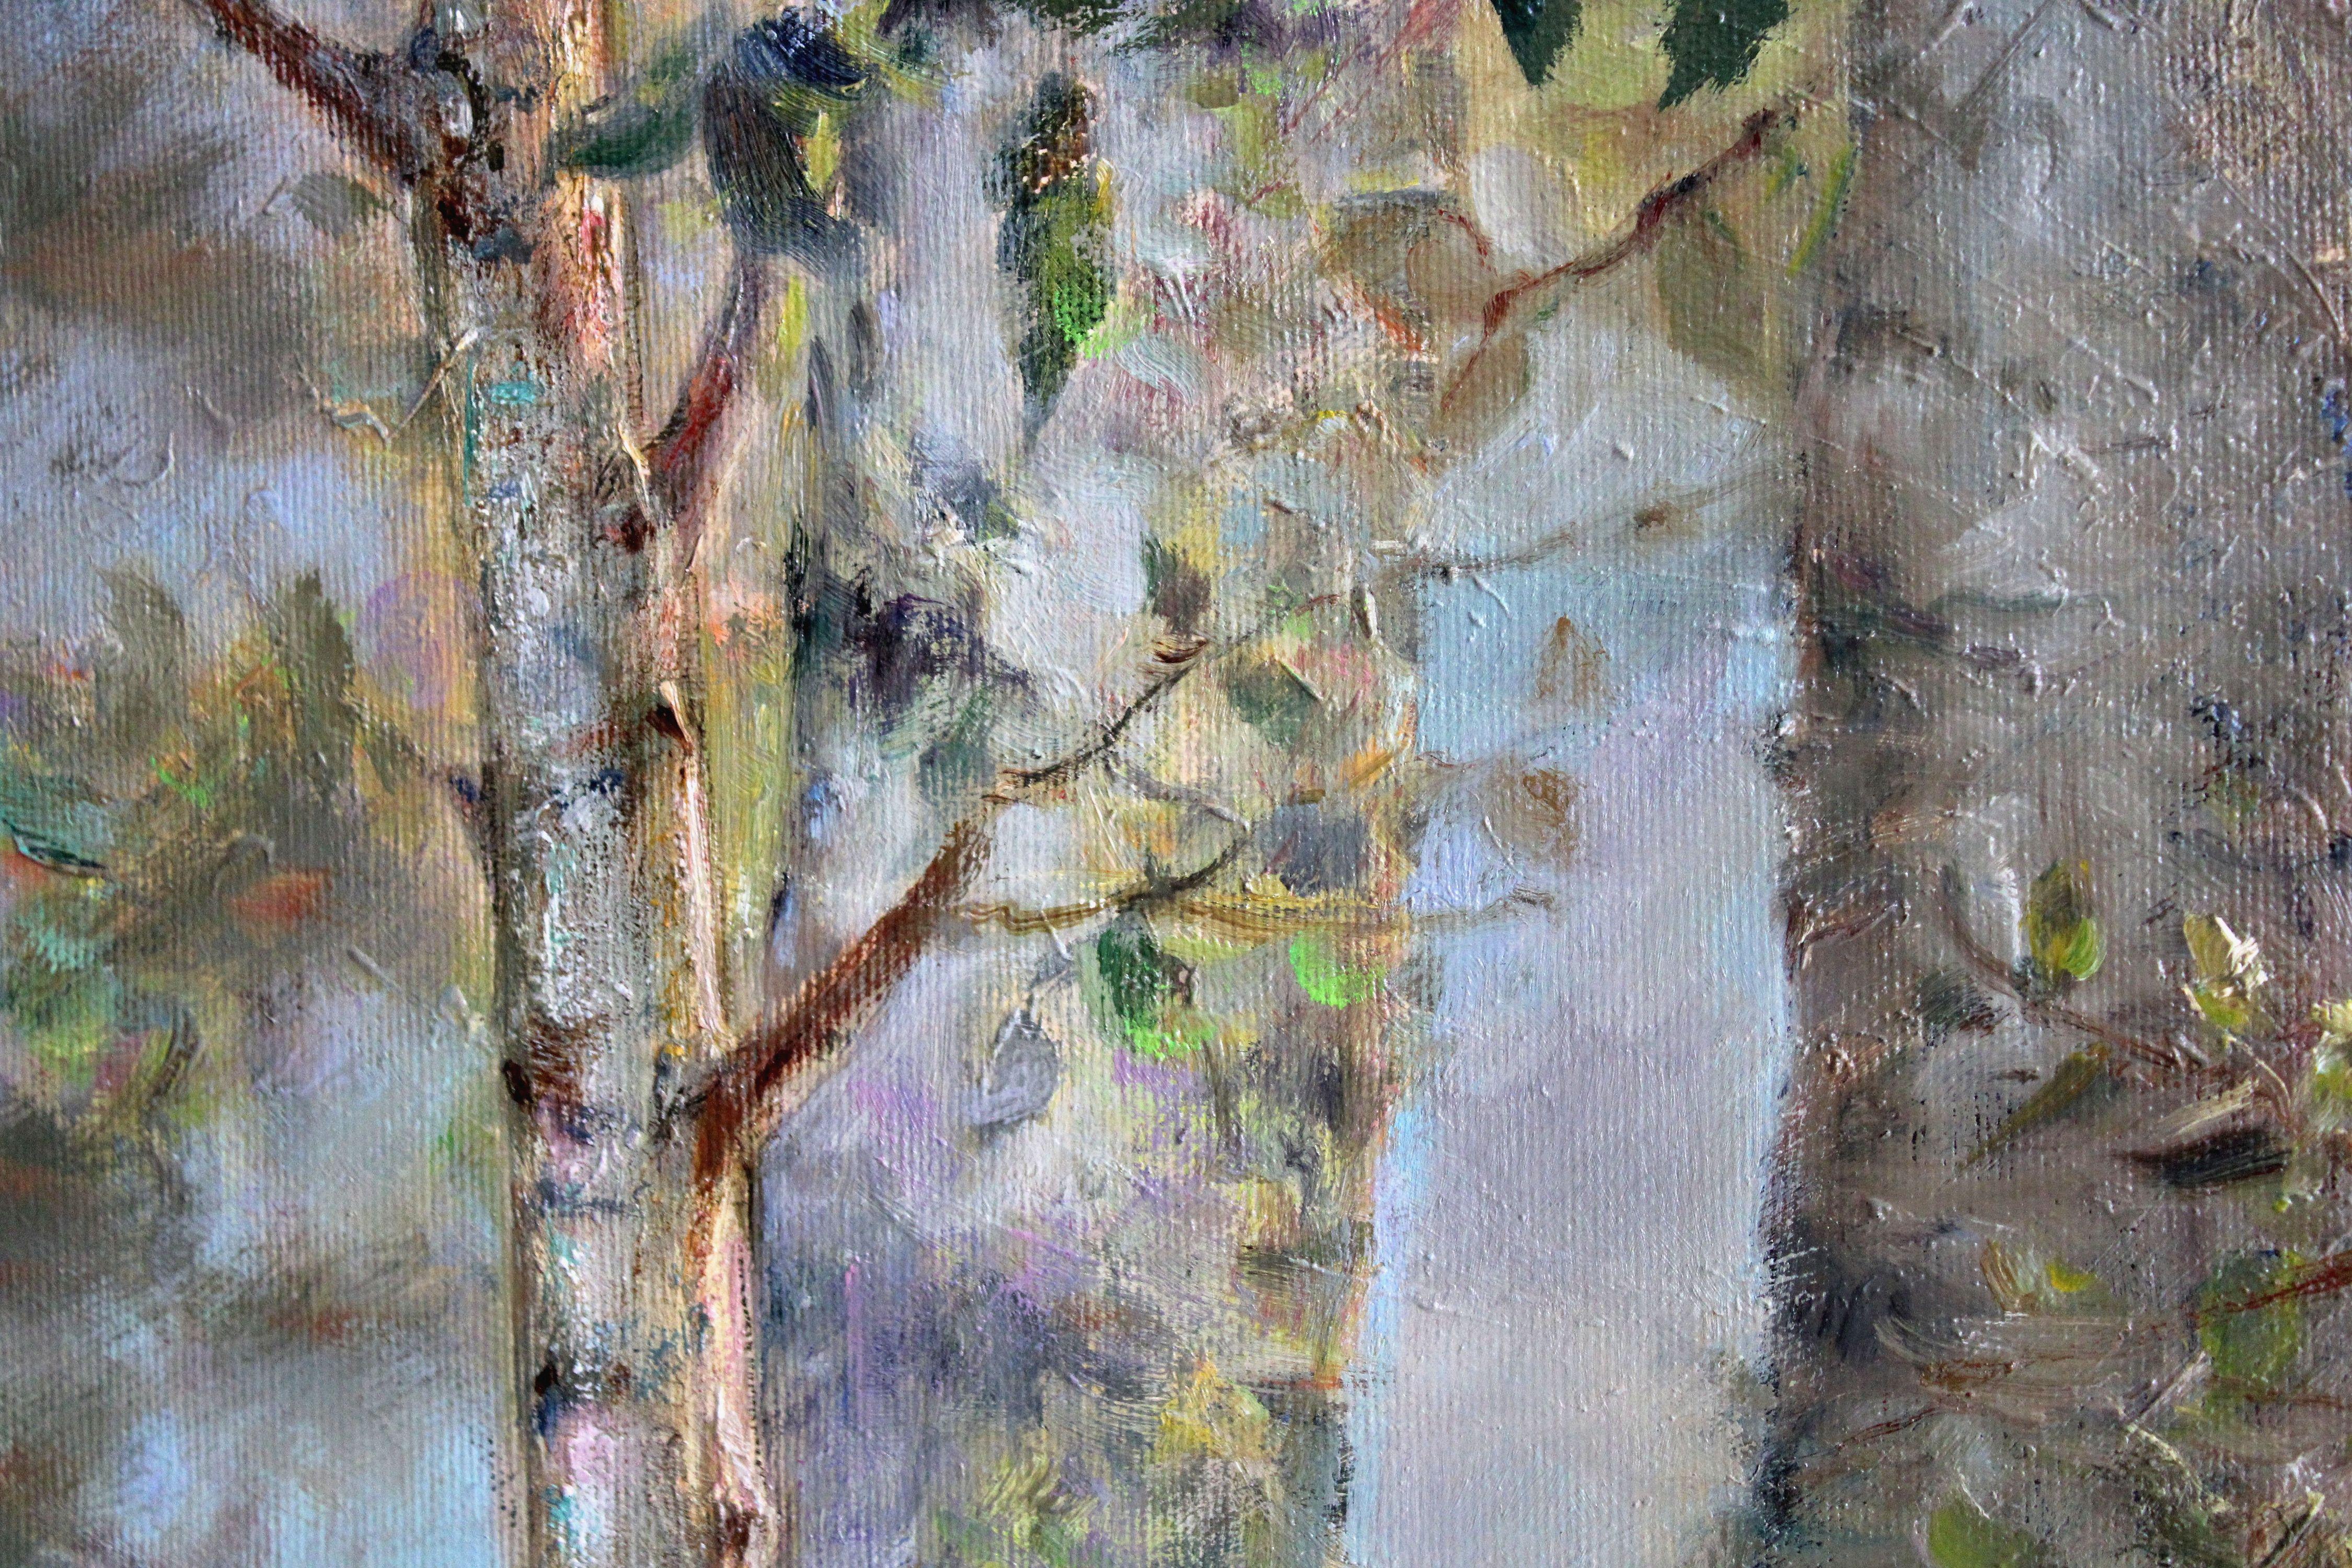 Landscape with birch trees. 2010, canvas, oil, 79x137 cm 5